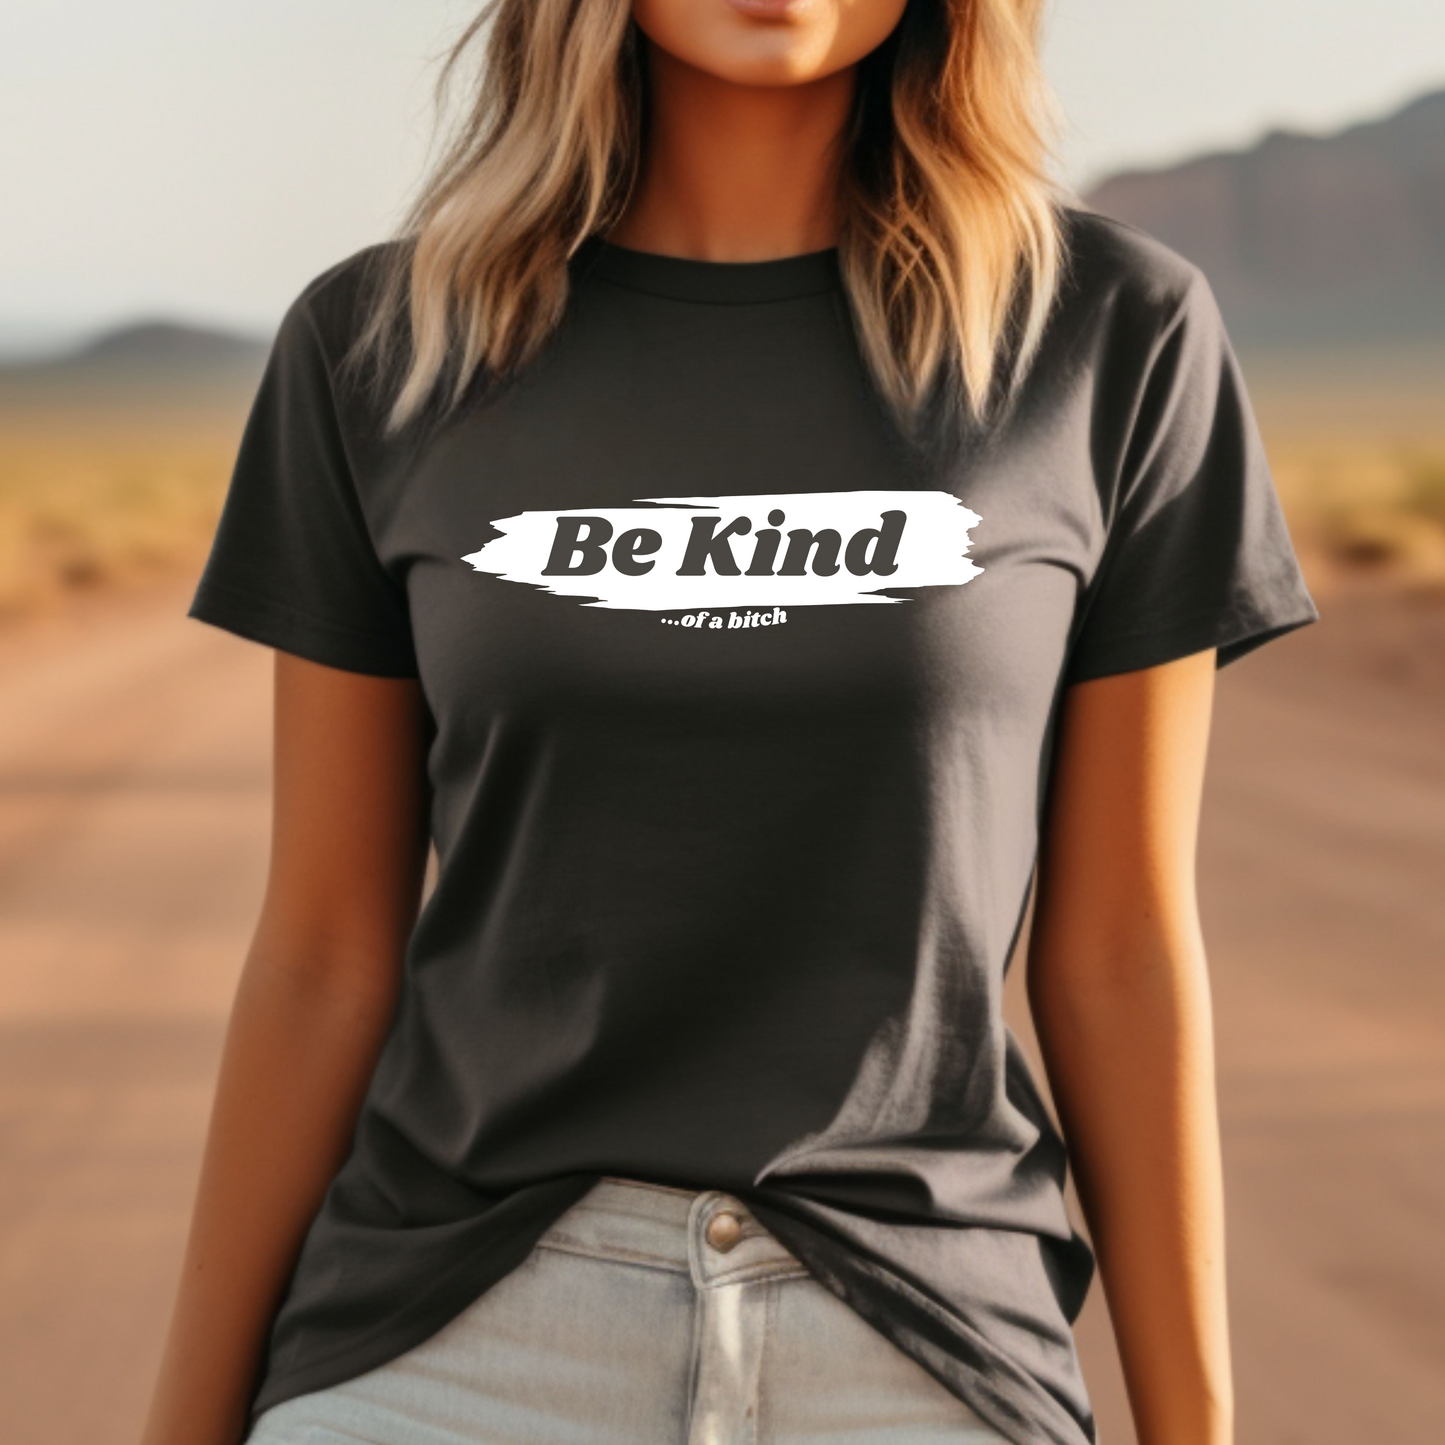 Be Kind...of a Bitch T-Shirt